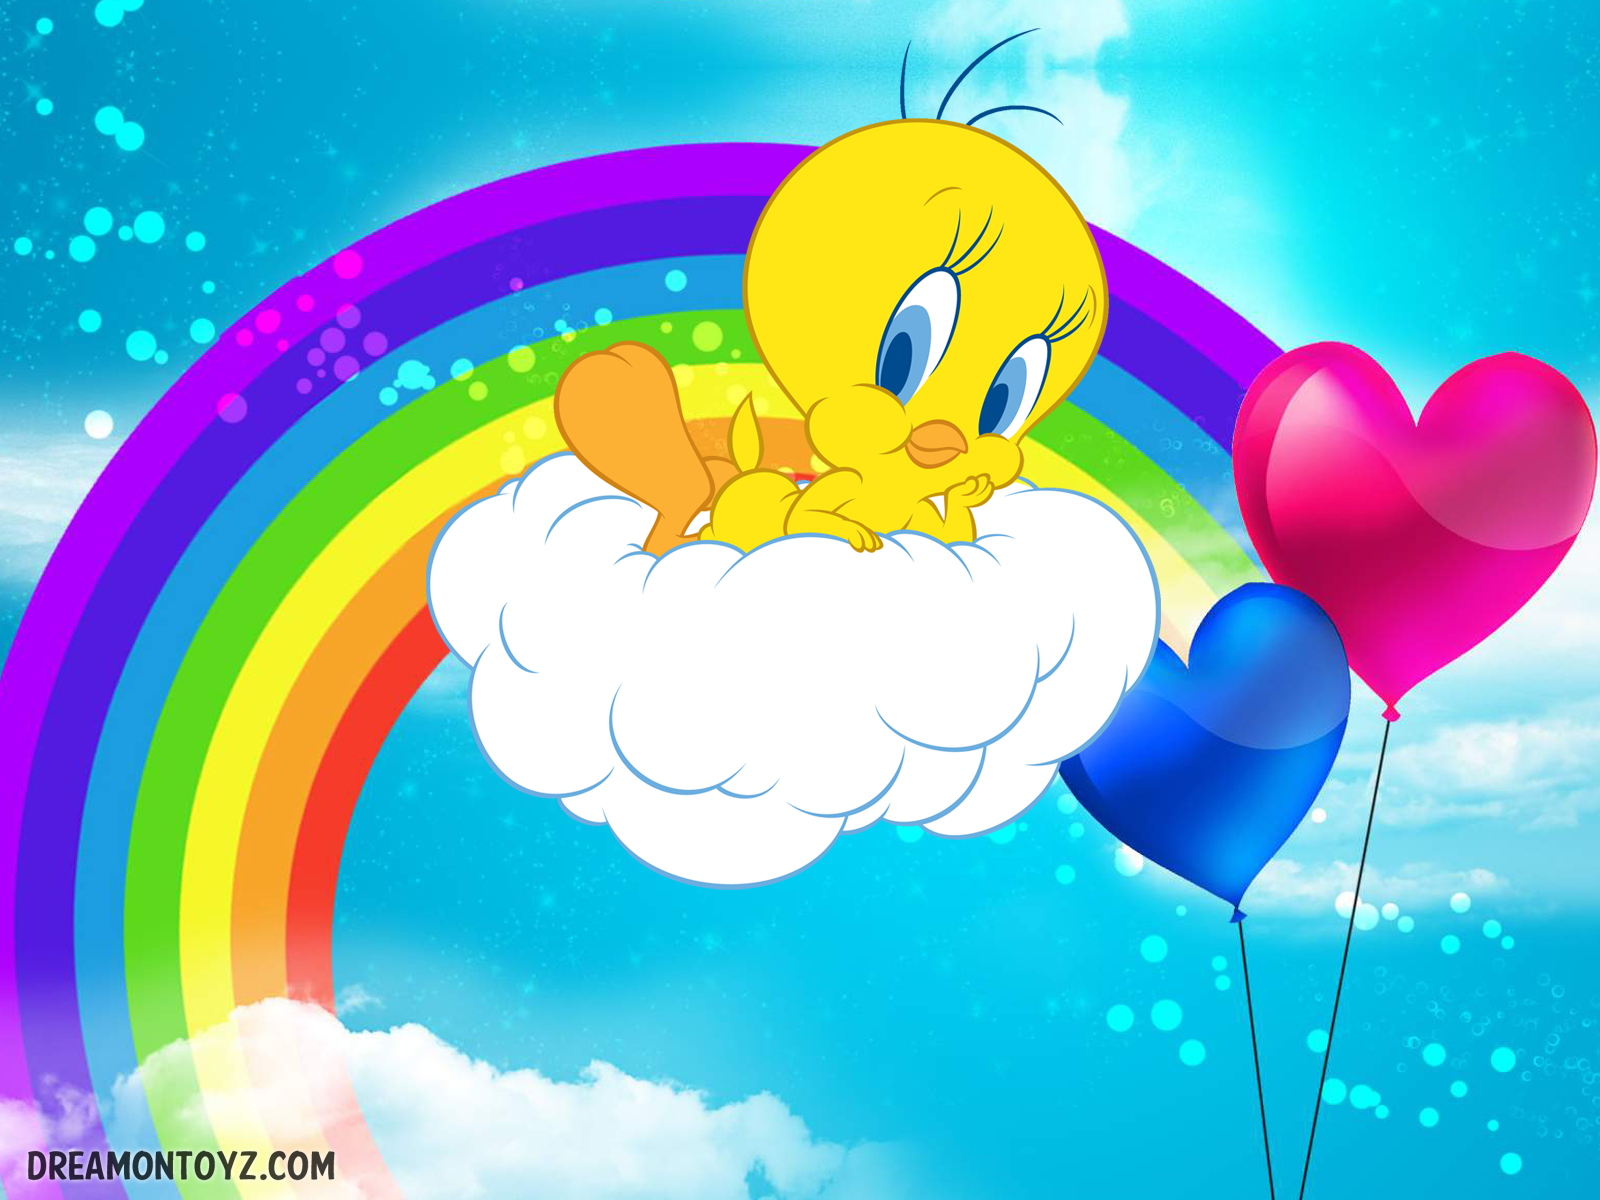 Tweety Bird On A Cloud With Rainbow And Heart Balloons